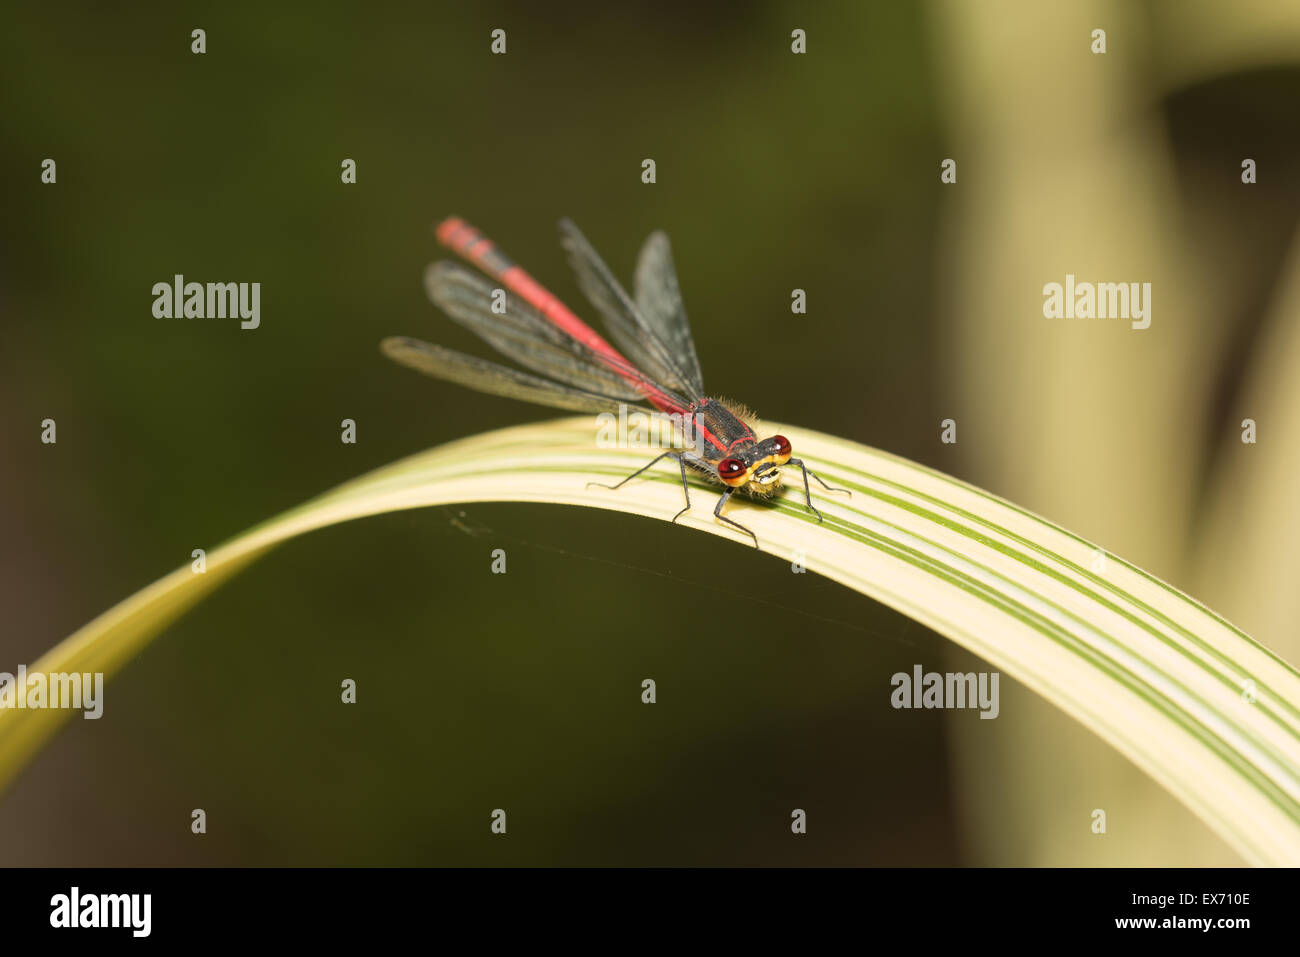 A newly emerged large male deep red damselfly Pyrrhosoma nymphula on variated water reed leaf with large compound eyes Stock Photo